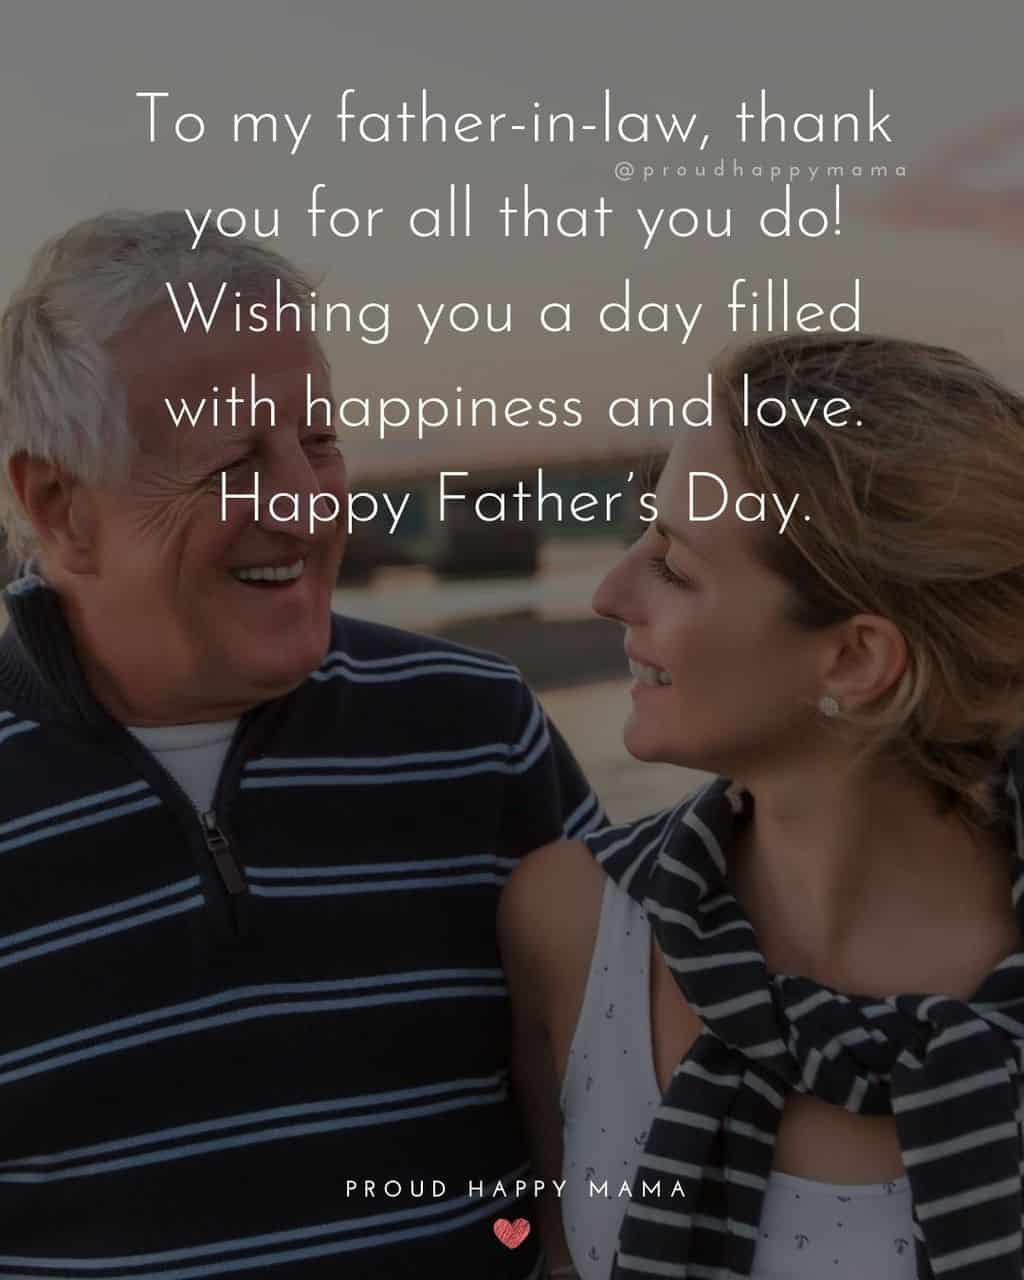 Happy Fathers Day Quotes For Father In Law - To my father in law, thank you for all that you do! Wishing you a day filled with